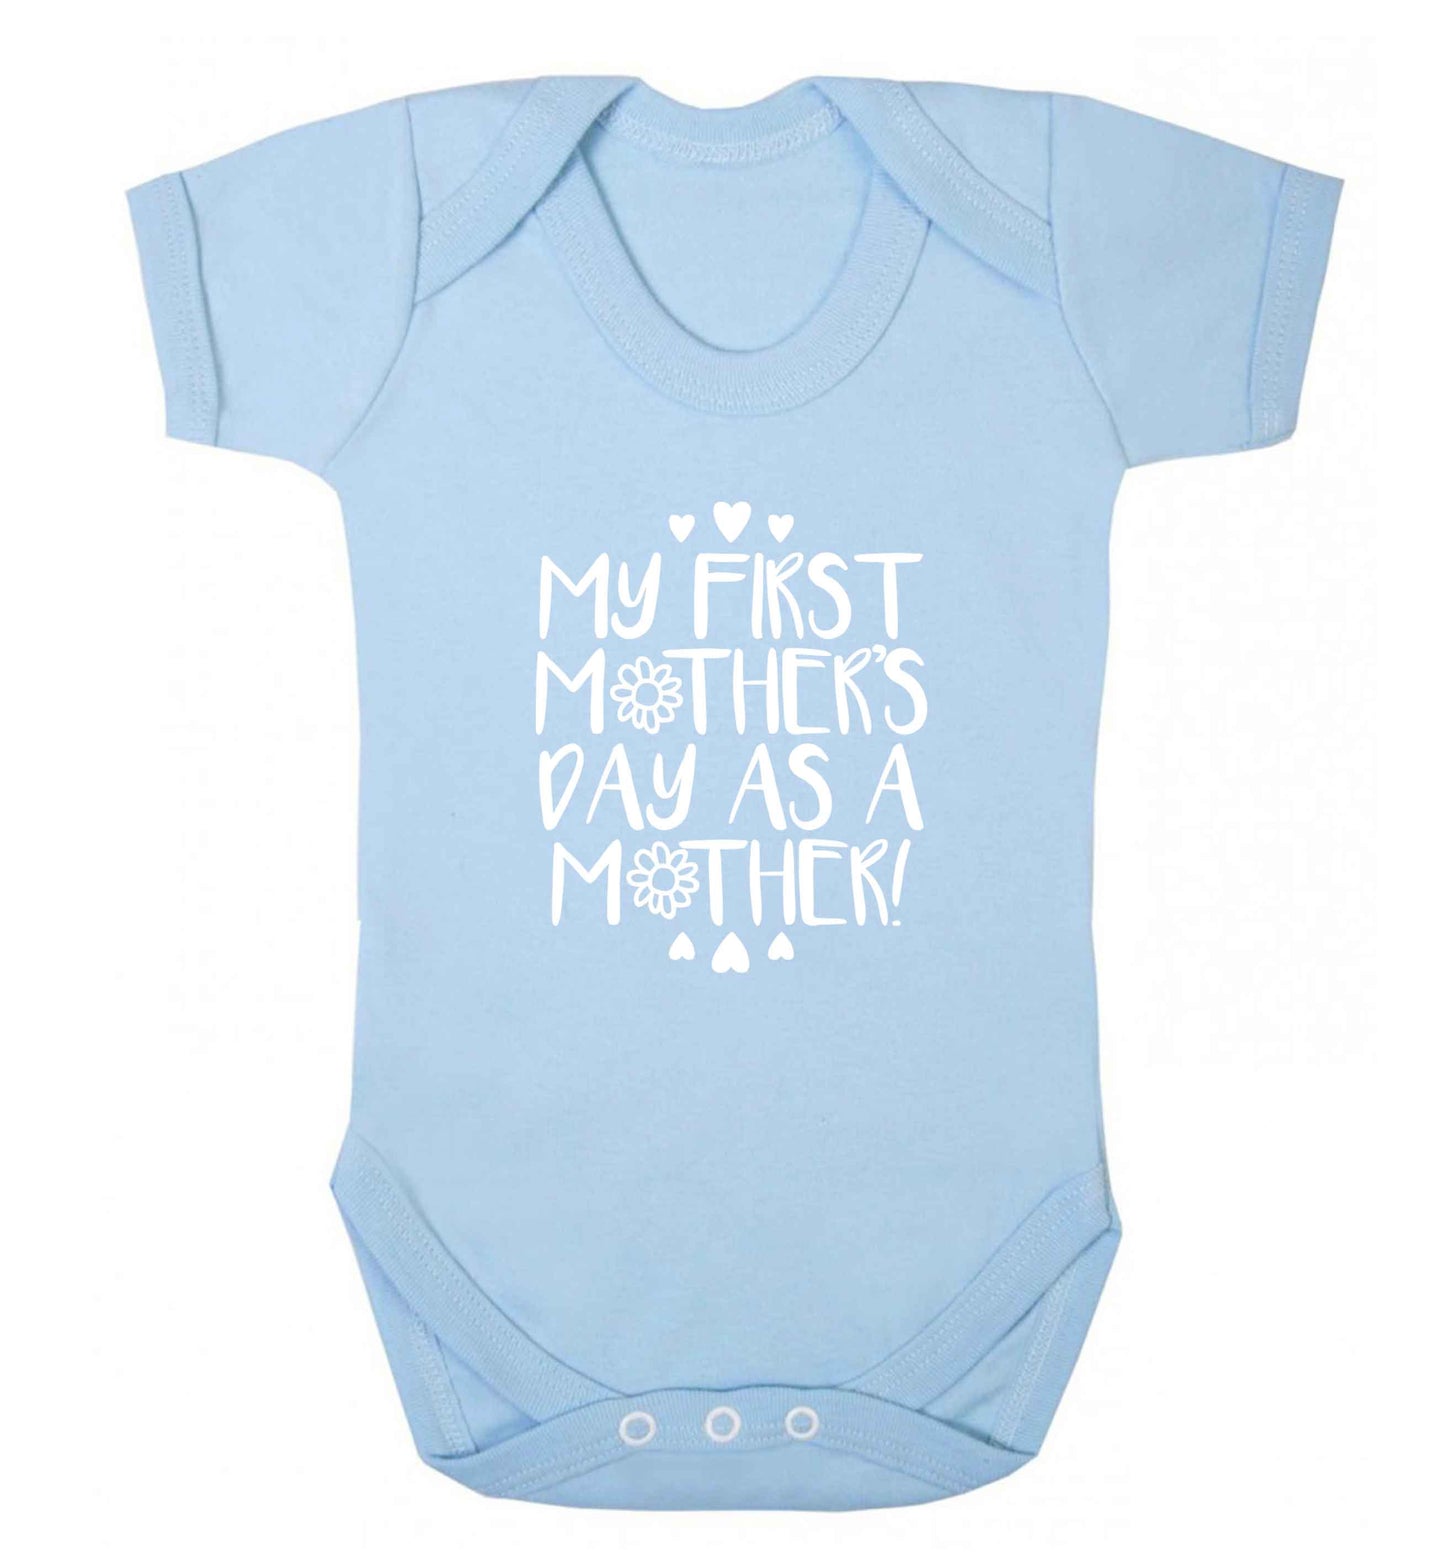 It's my first mother's day as a mother baby vest pale blue 18-24 months